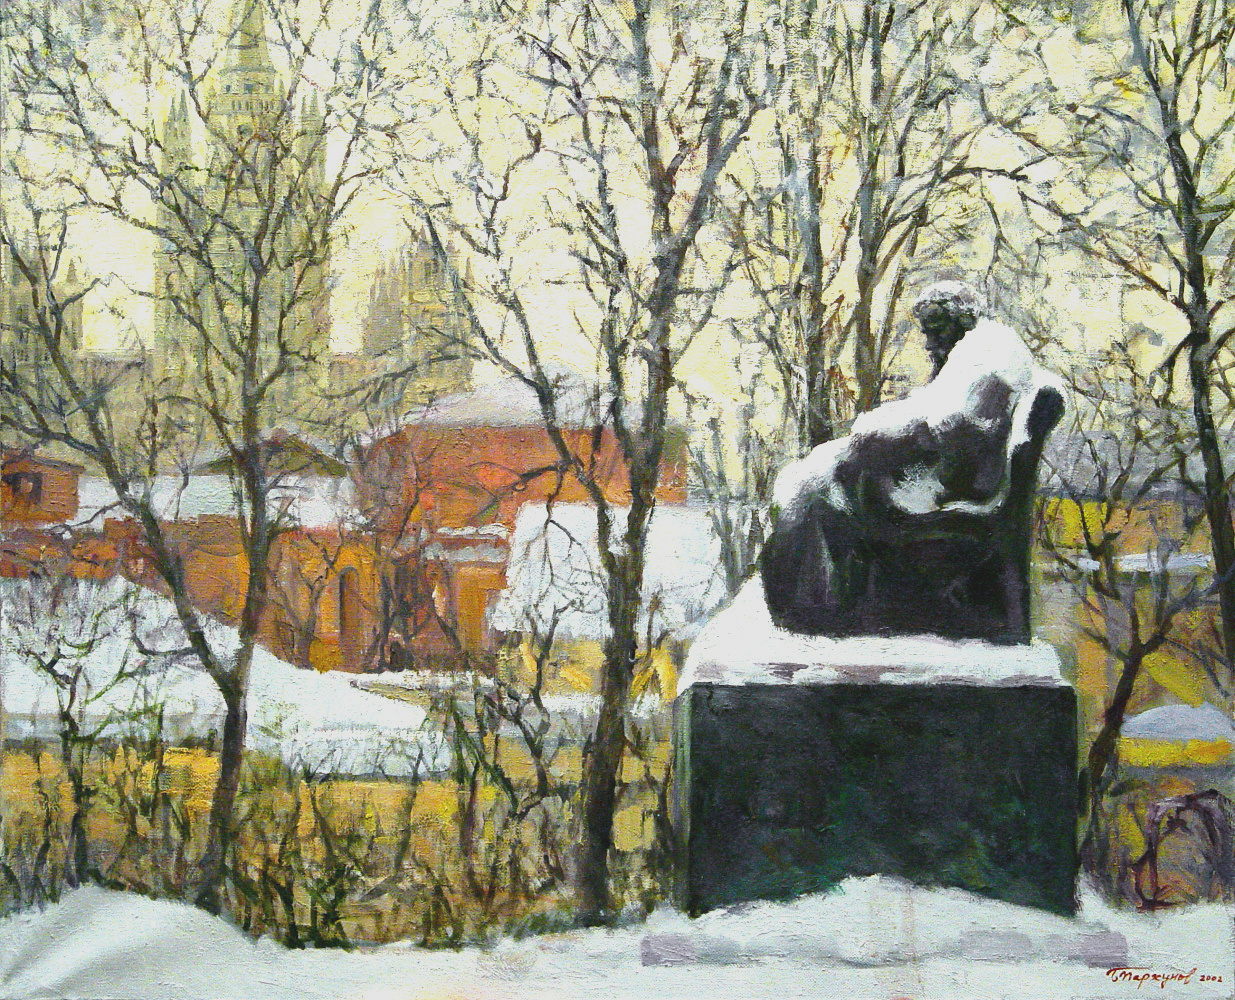 Moscow in the snow (Tolstoy monument)